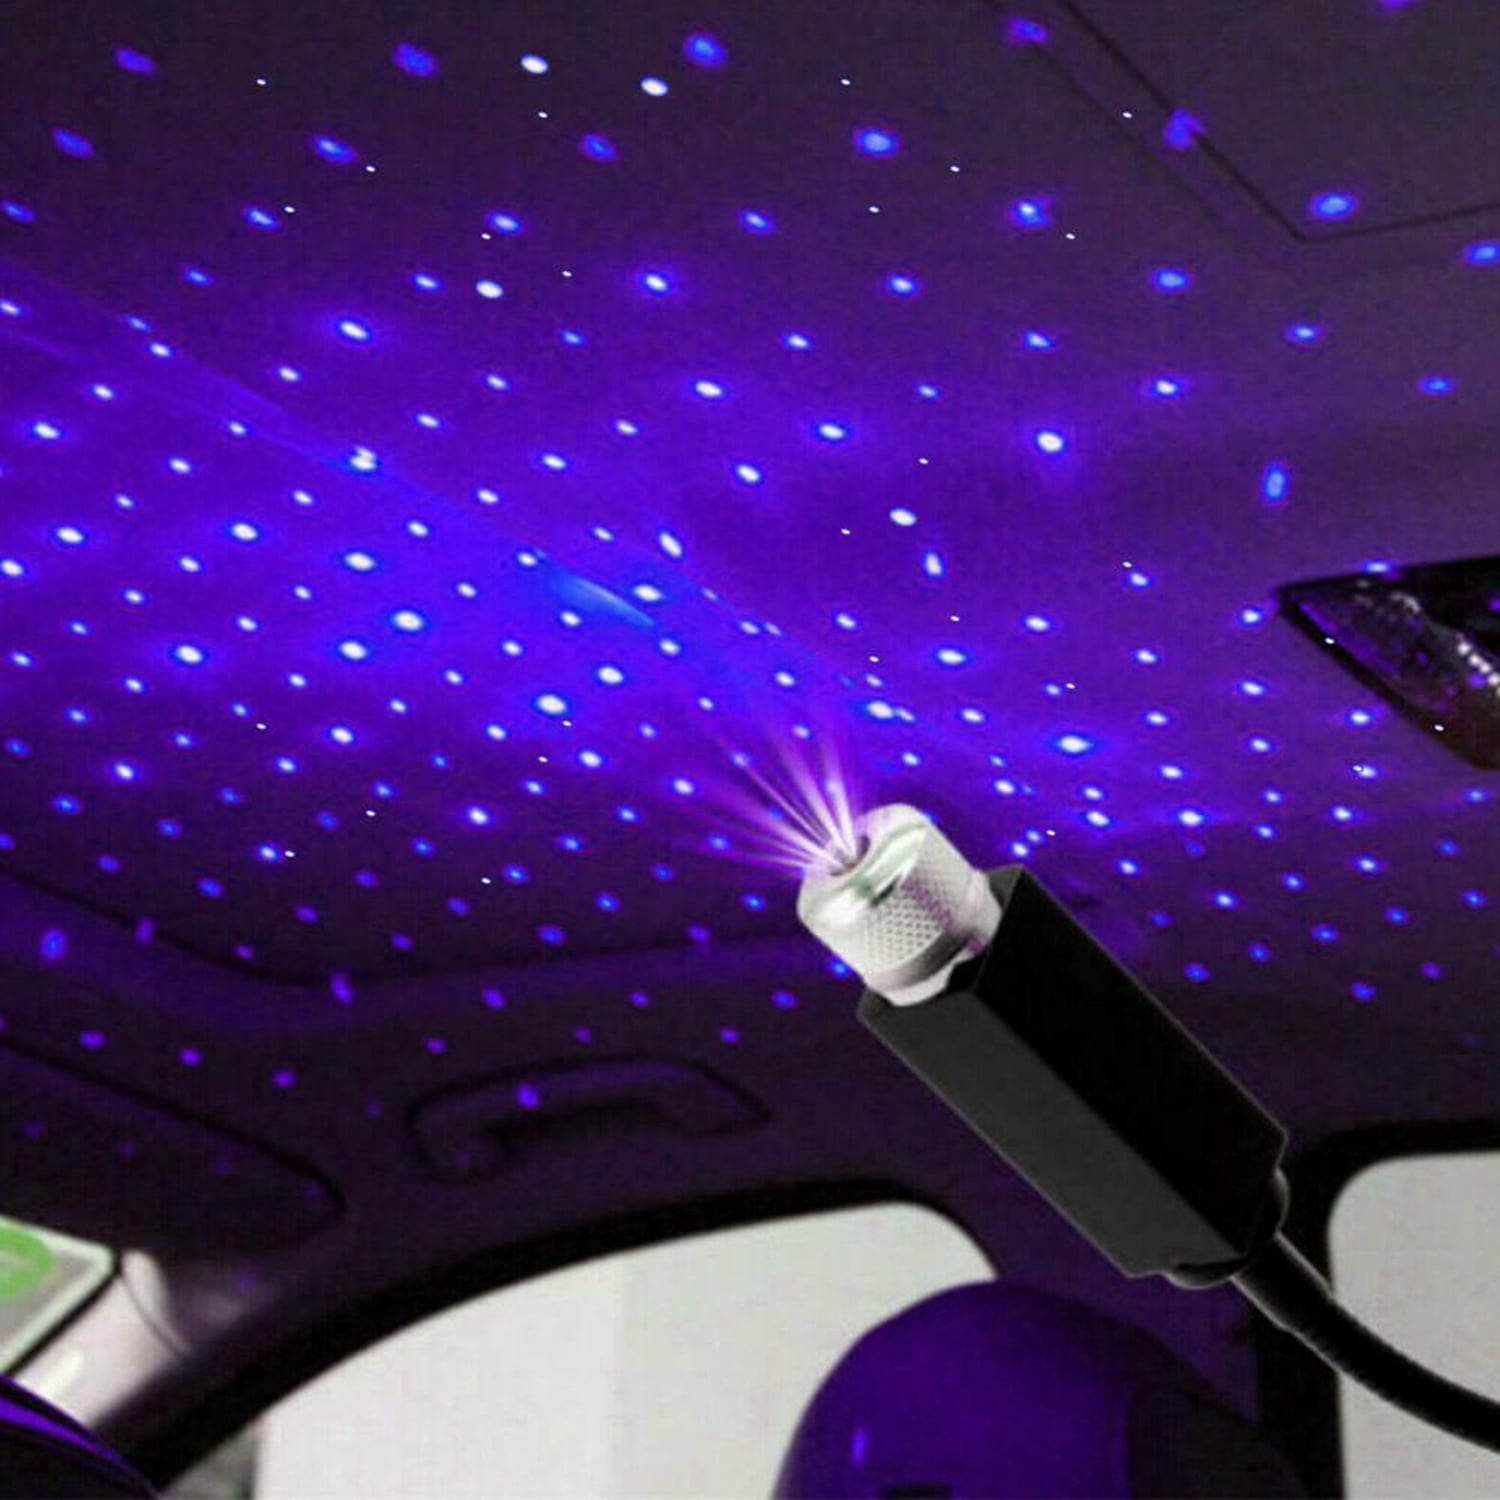 Ceiling Party Red Bedroom Auto Roof Star Lights Adjustable Romantic Star Projector Night Lights Portable USB Car Roof Light Decorations for Car Elec3 Car Star Lights USB 